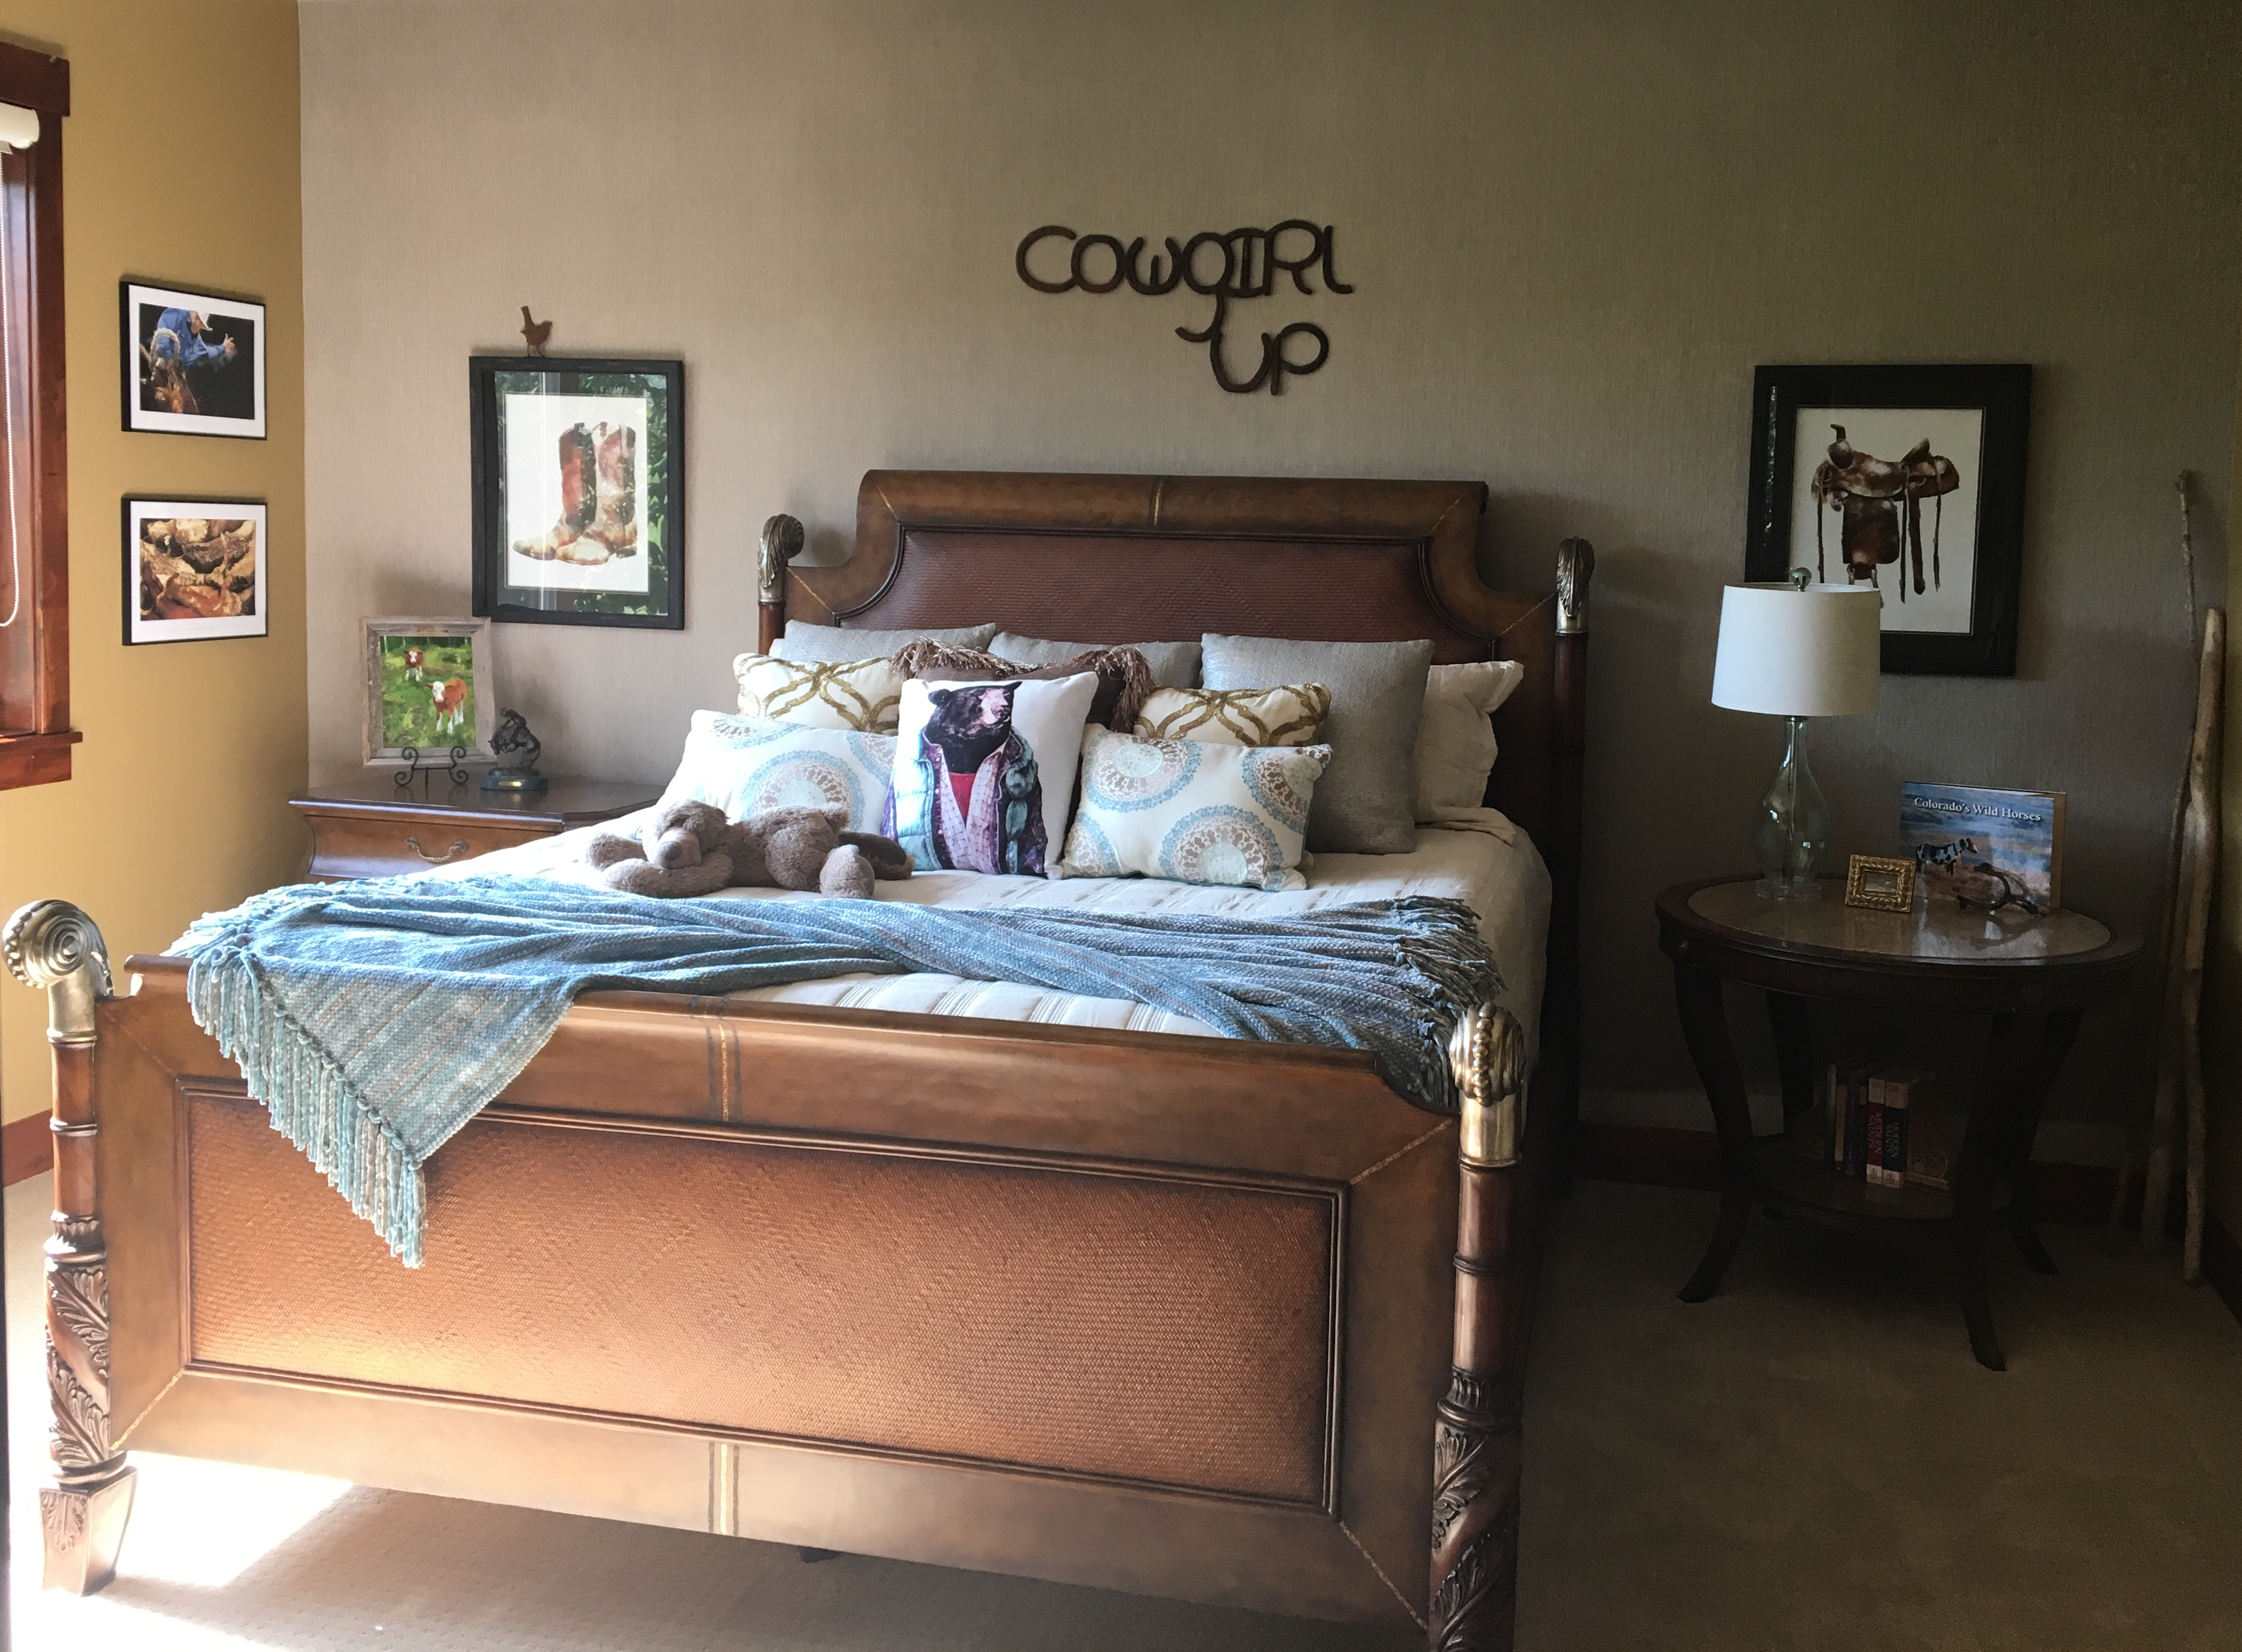 Scrimshaws Portfolio of cowgirl bedroom design with a brown bed frame including pictures of old boots, saddle, and “Cowgirl Up” horseshoe artwork.